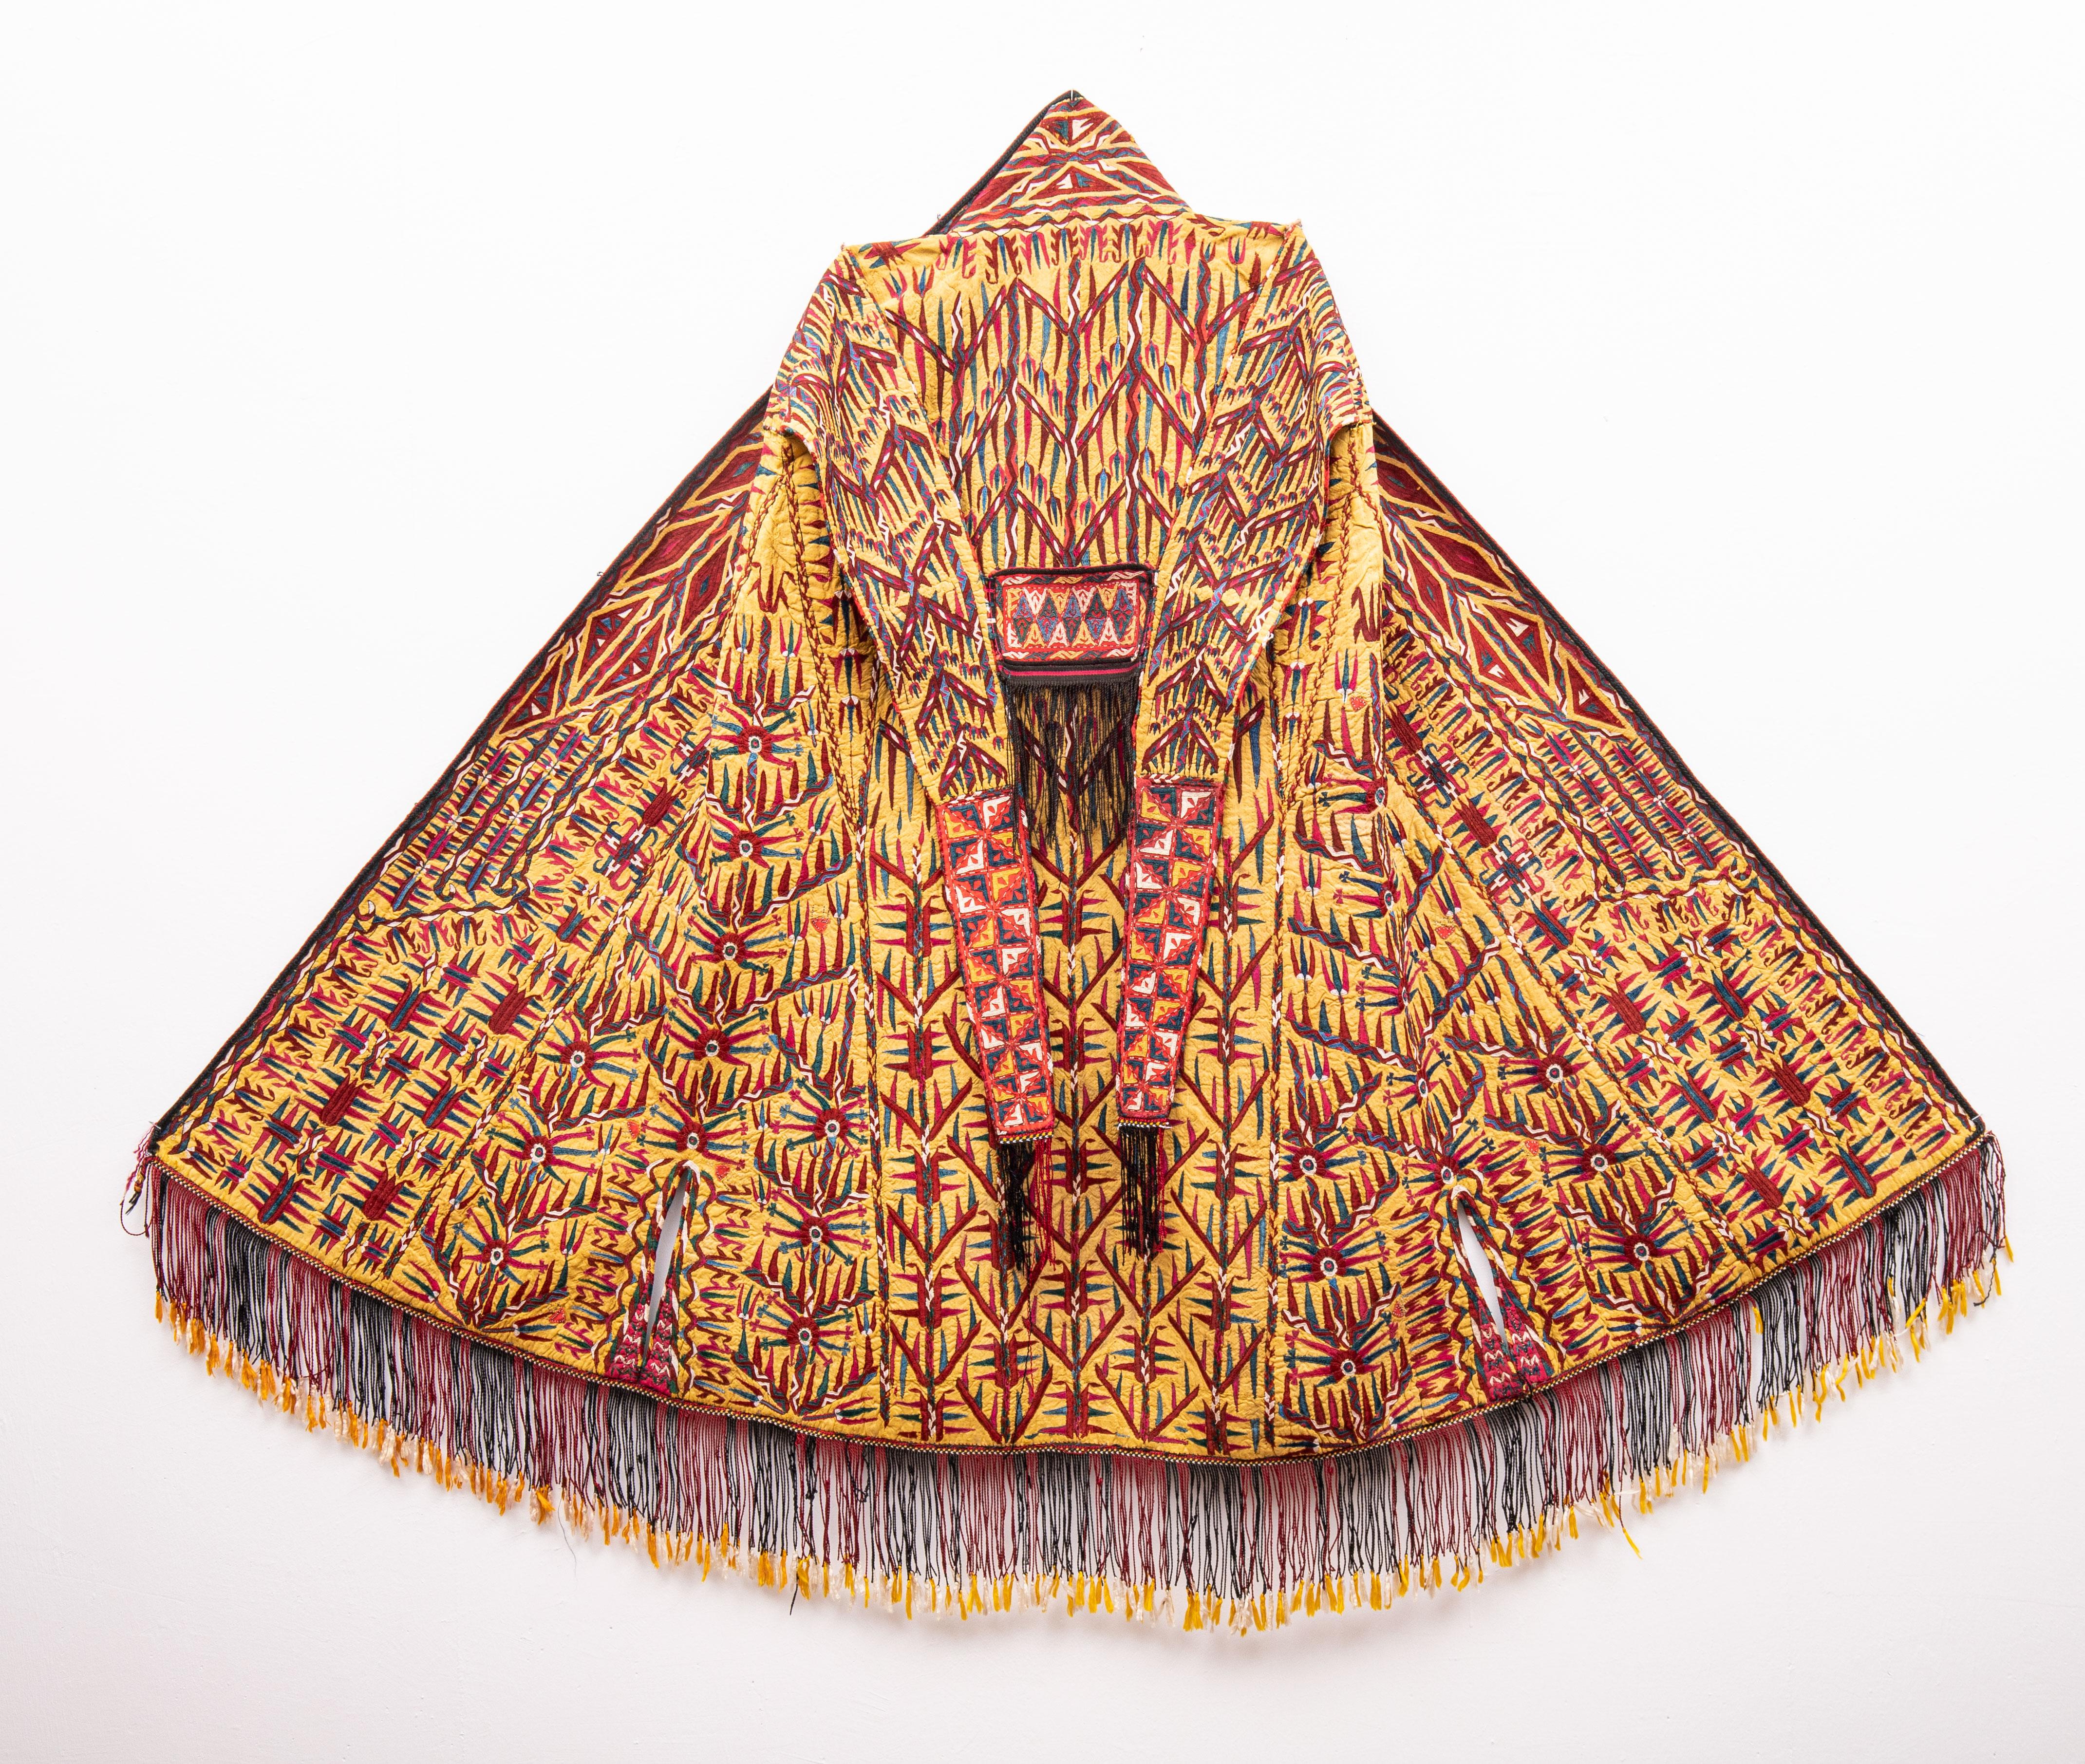 An exclusive Turkmen tribal chyrpy, a gown worn over the head or shoulder with decorative sleeves is an iconic Turkmen textile art.